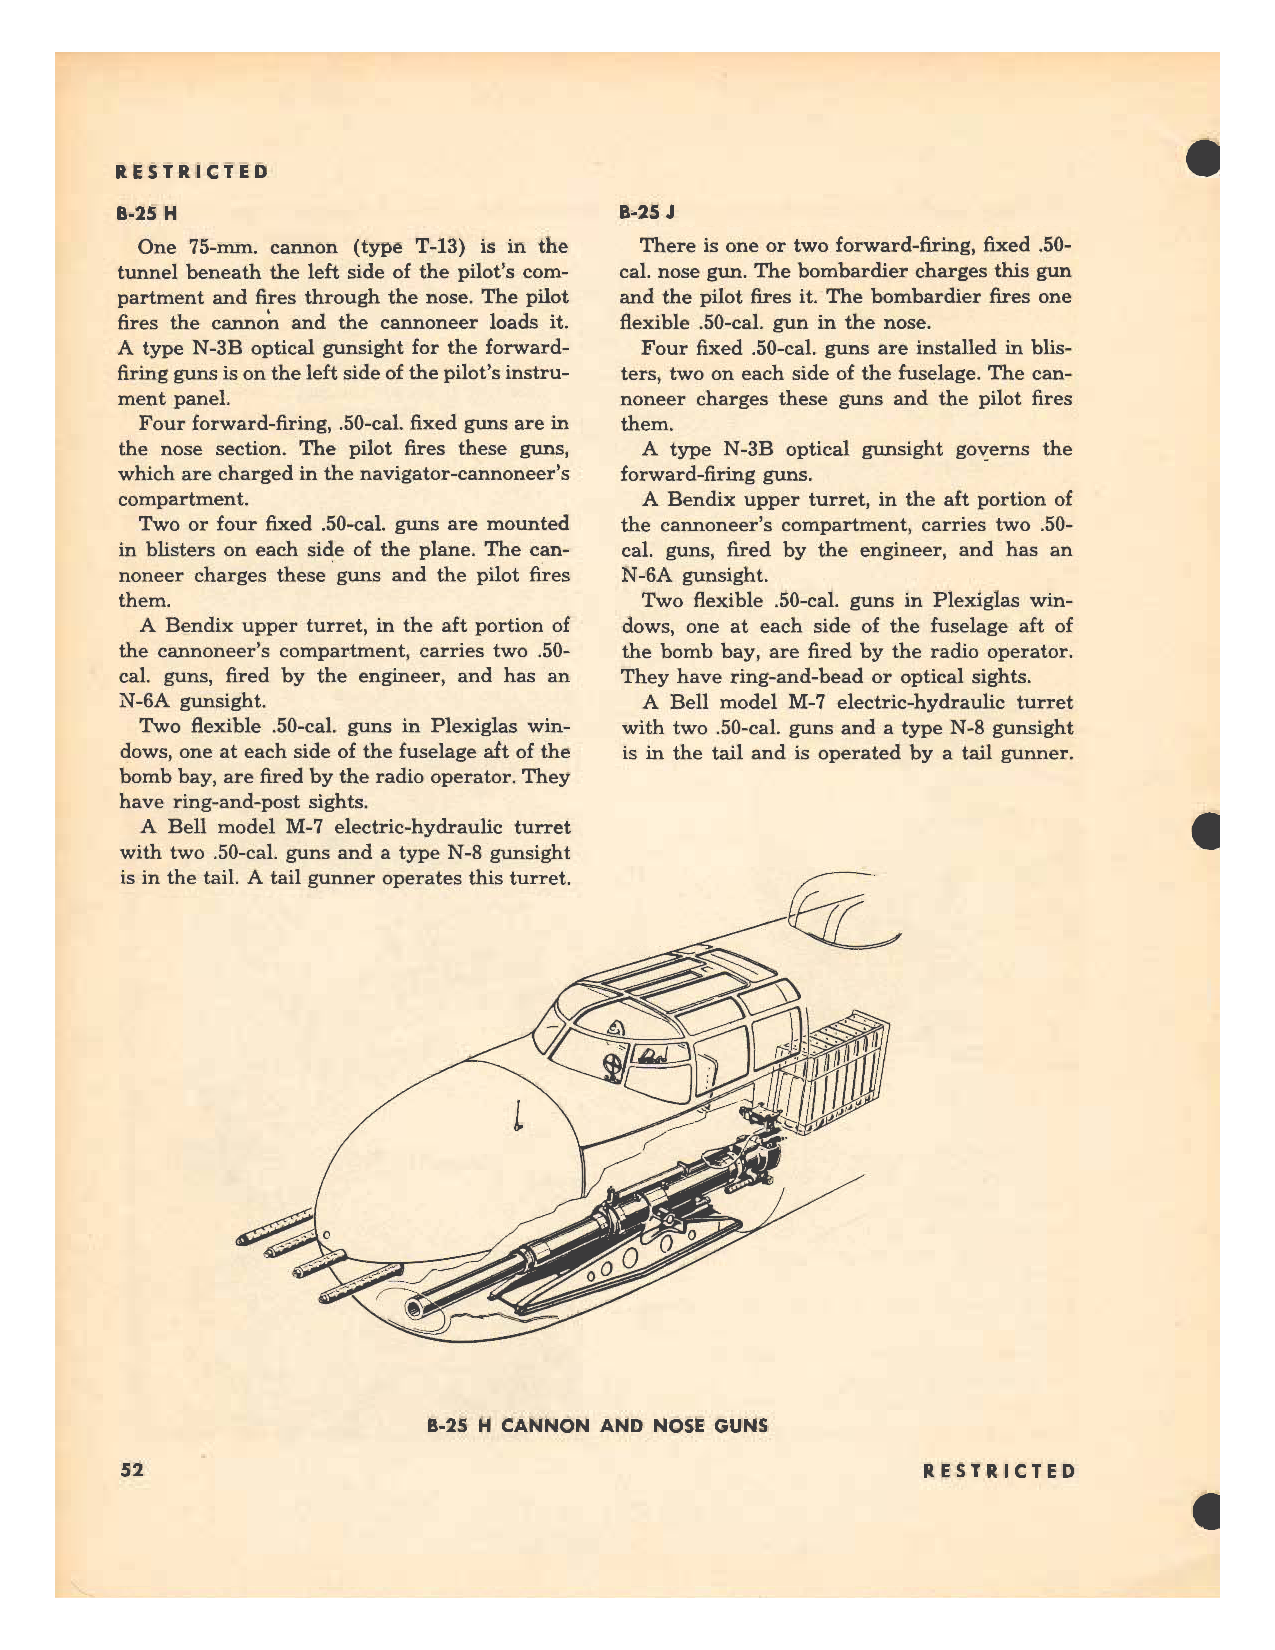 Sample page 52 from AirCorps Library document: Pilot Training Manual - B-25